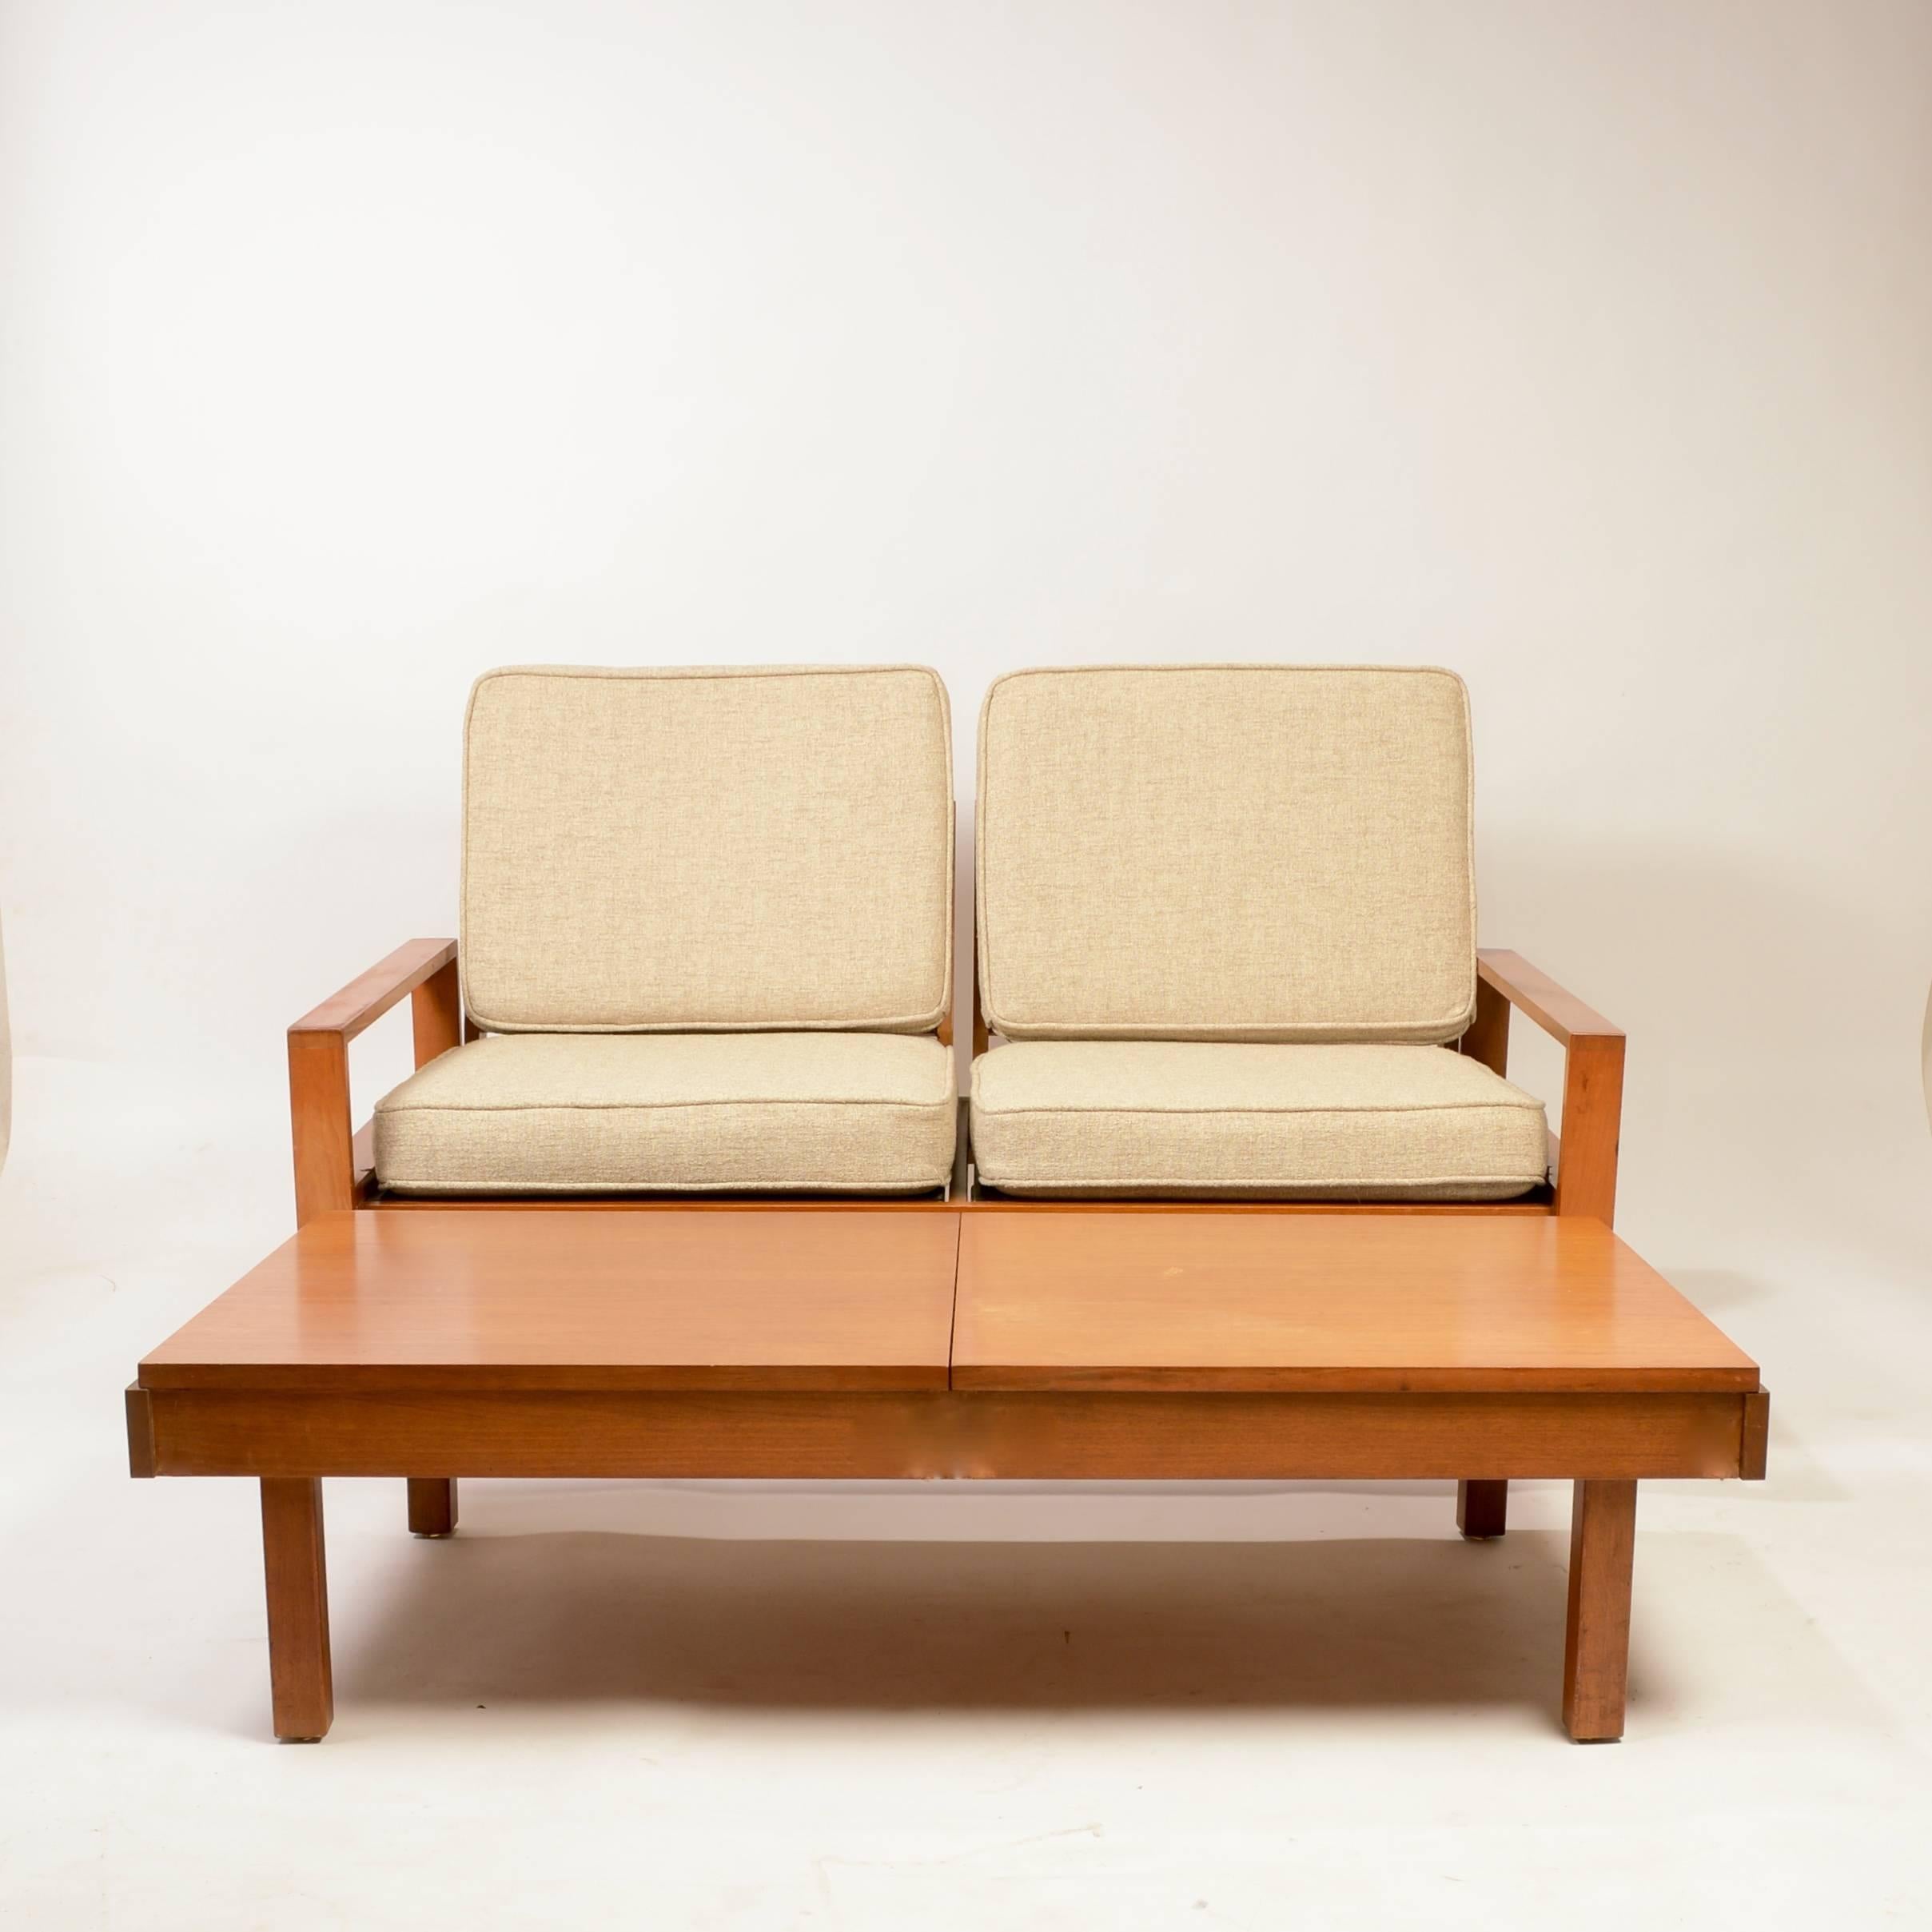 Mid-20th Century Chair by Martin Borenstein for the Brown & Saltman Modular Living Room System